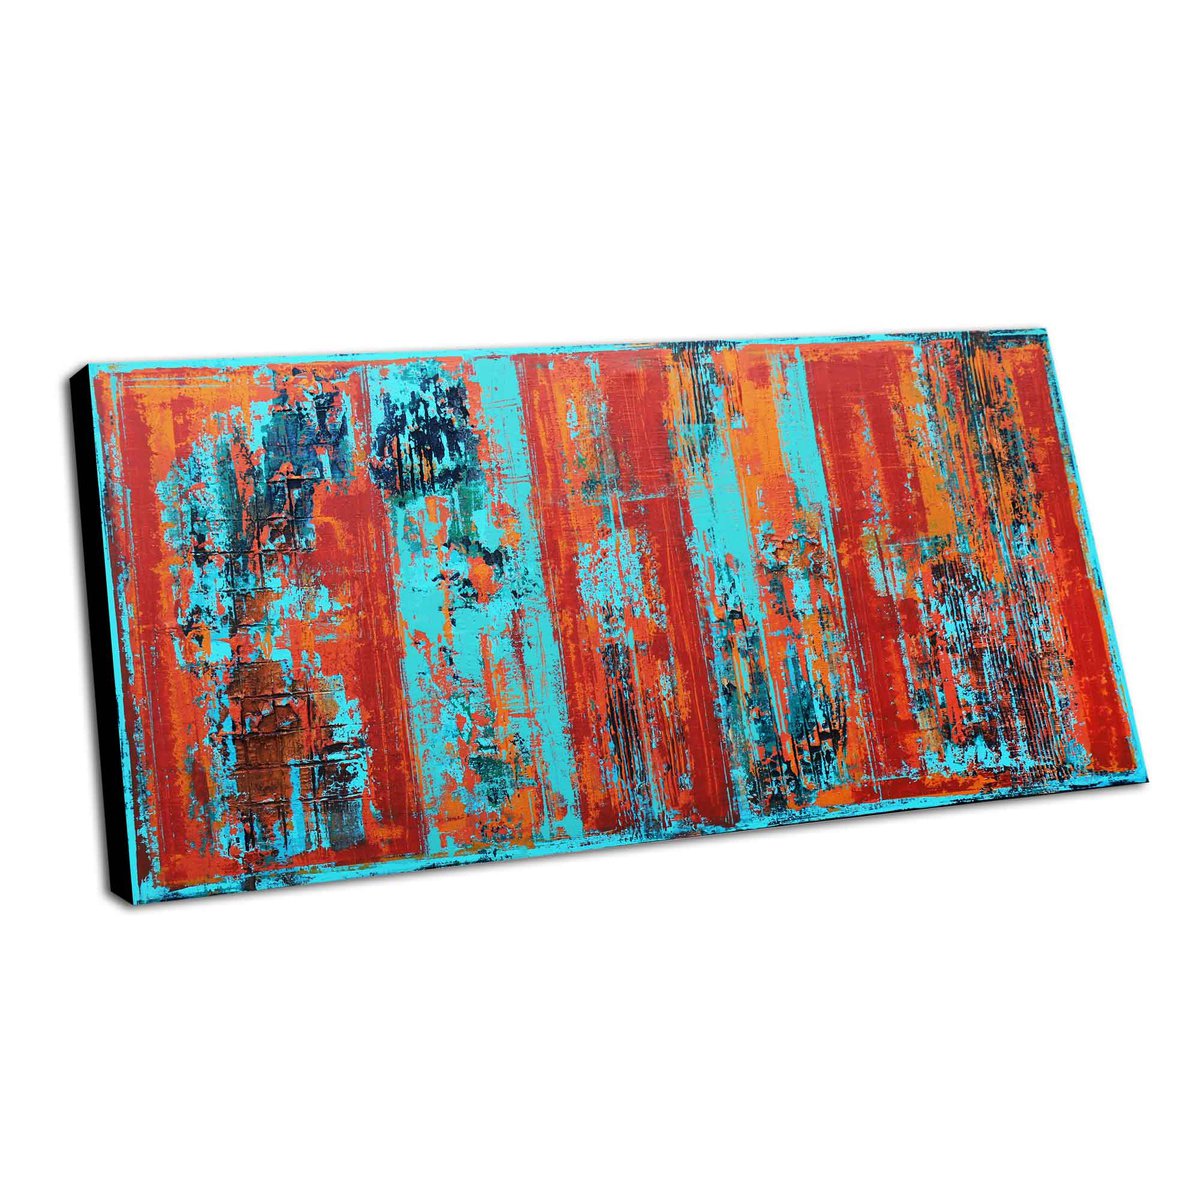 COLOR FUSION - ABSTRACT ACRYLIC PAINTING ON CANVAS * LARGE FORMAT * TURQUOISE * RED by Inez Froehlich